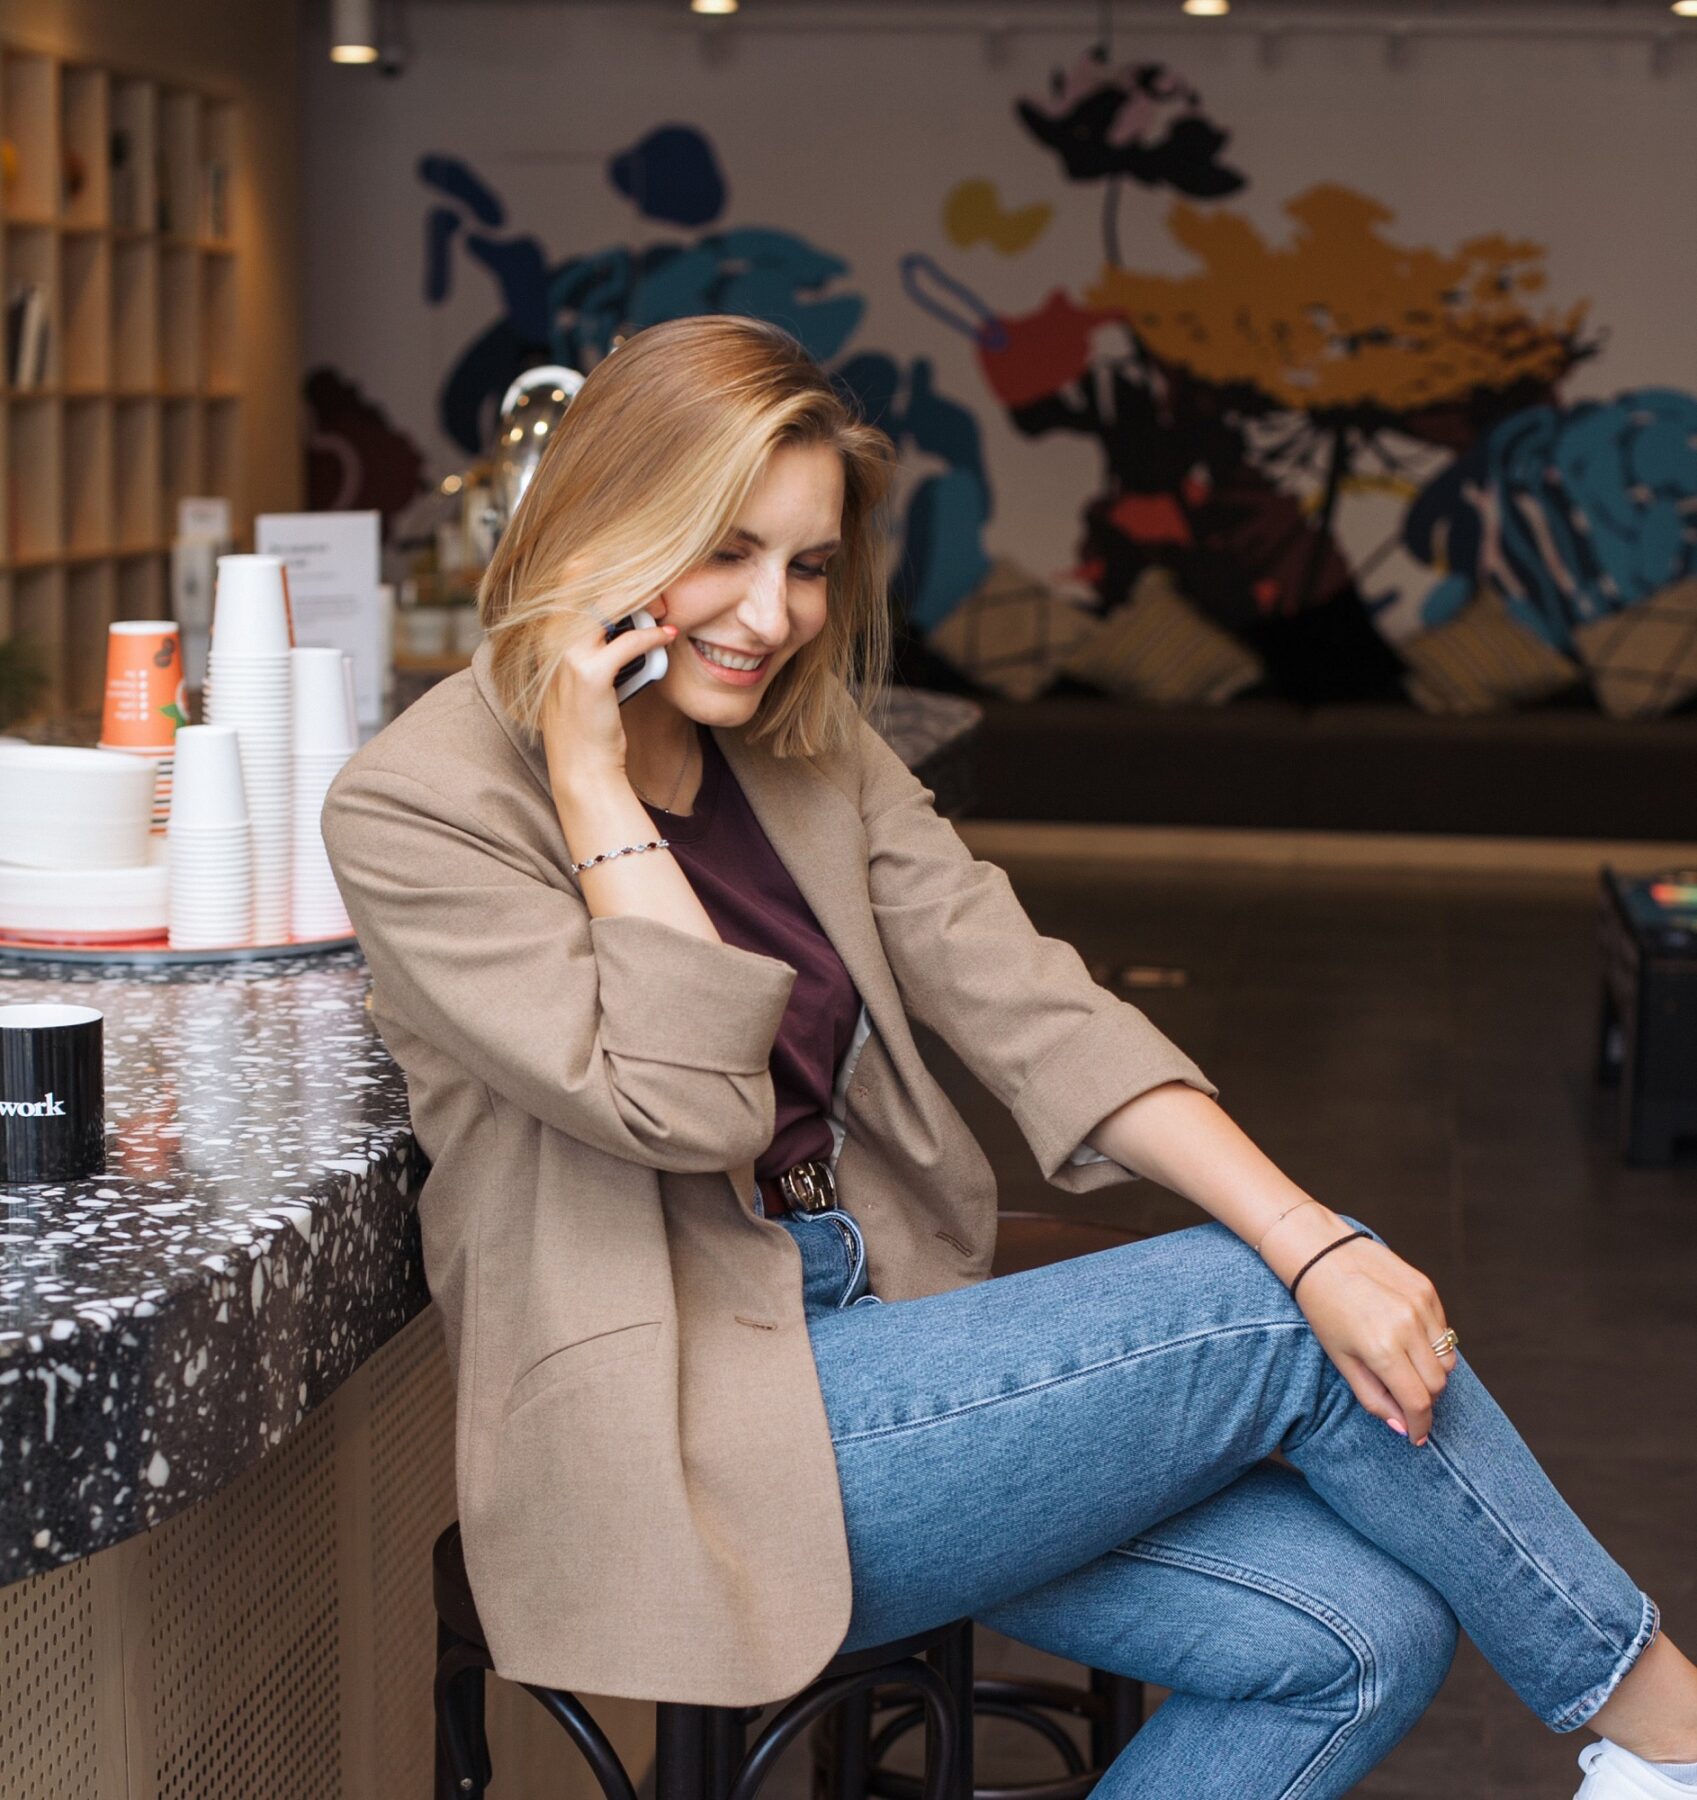 Woman sitting in a cafe talking on cell phone